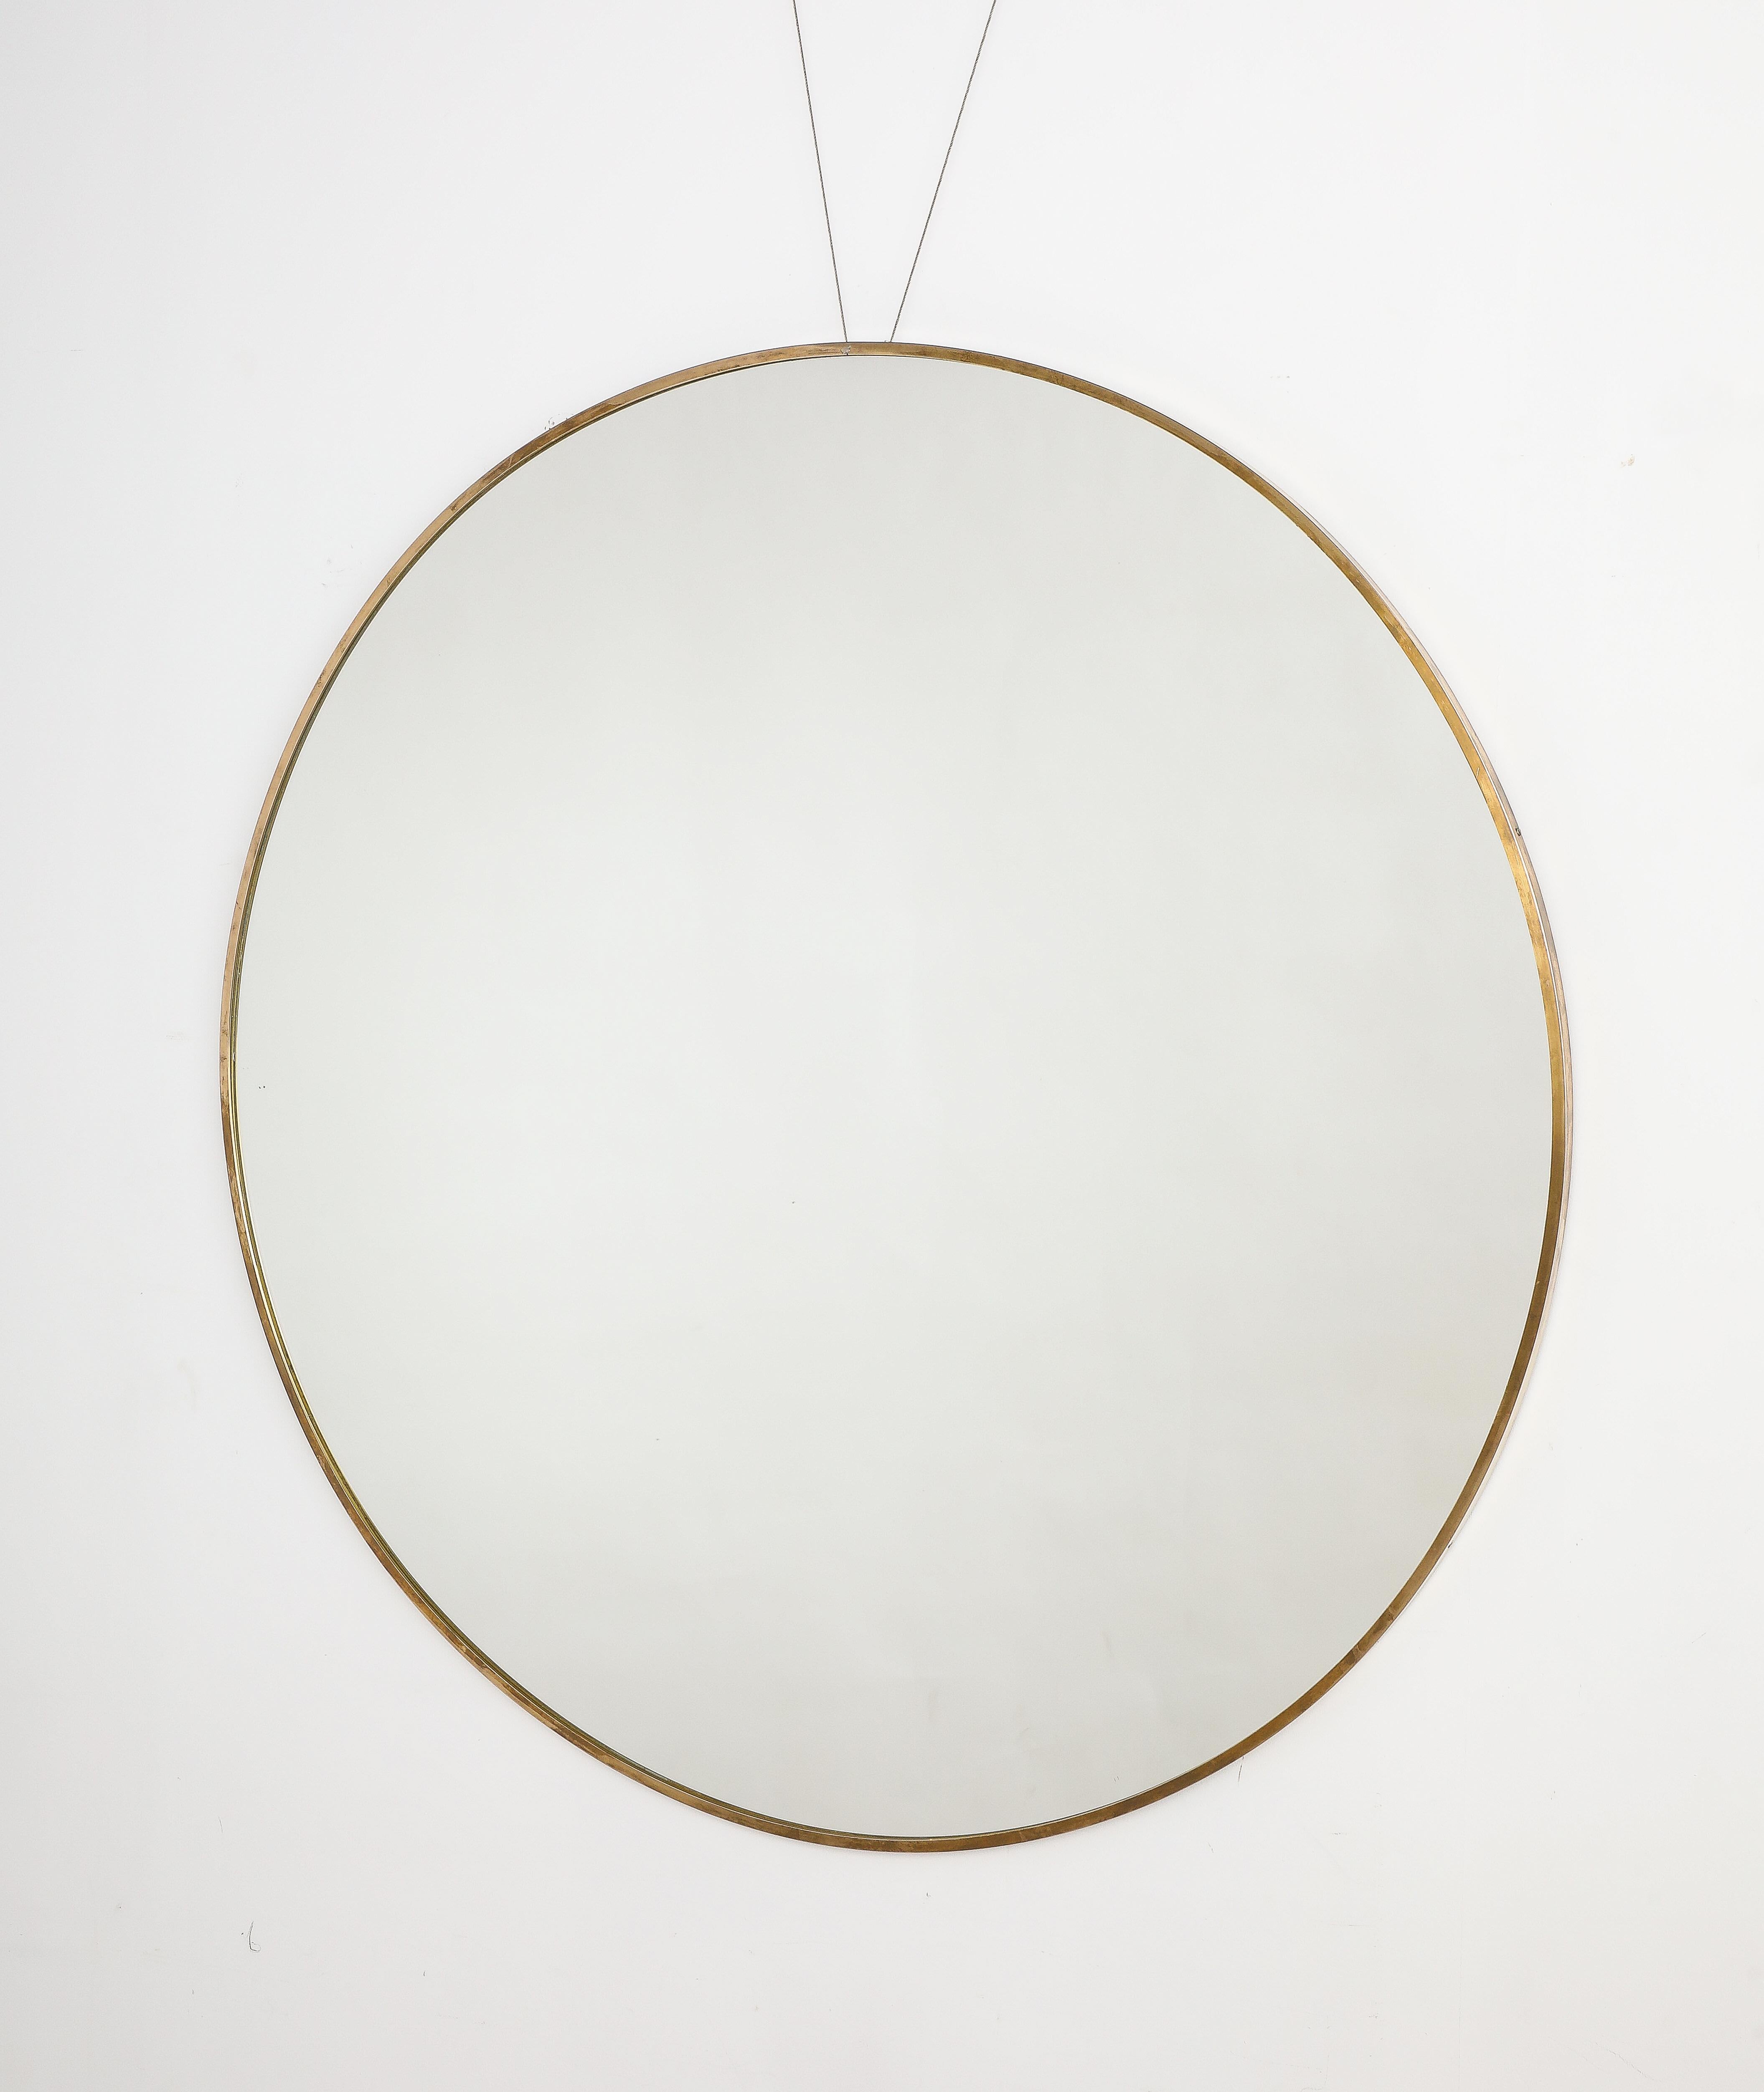 A rare grand scale Italian modernist brass circular mirror.  With wonderful patina, dramatic in size.  Would be a wonderful addition to any interior style.
Italy, circa 1950 
Size: 45 1/2